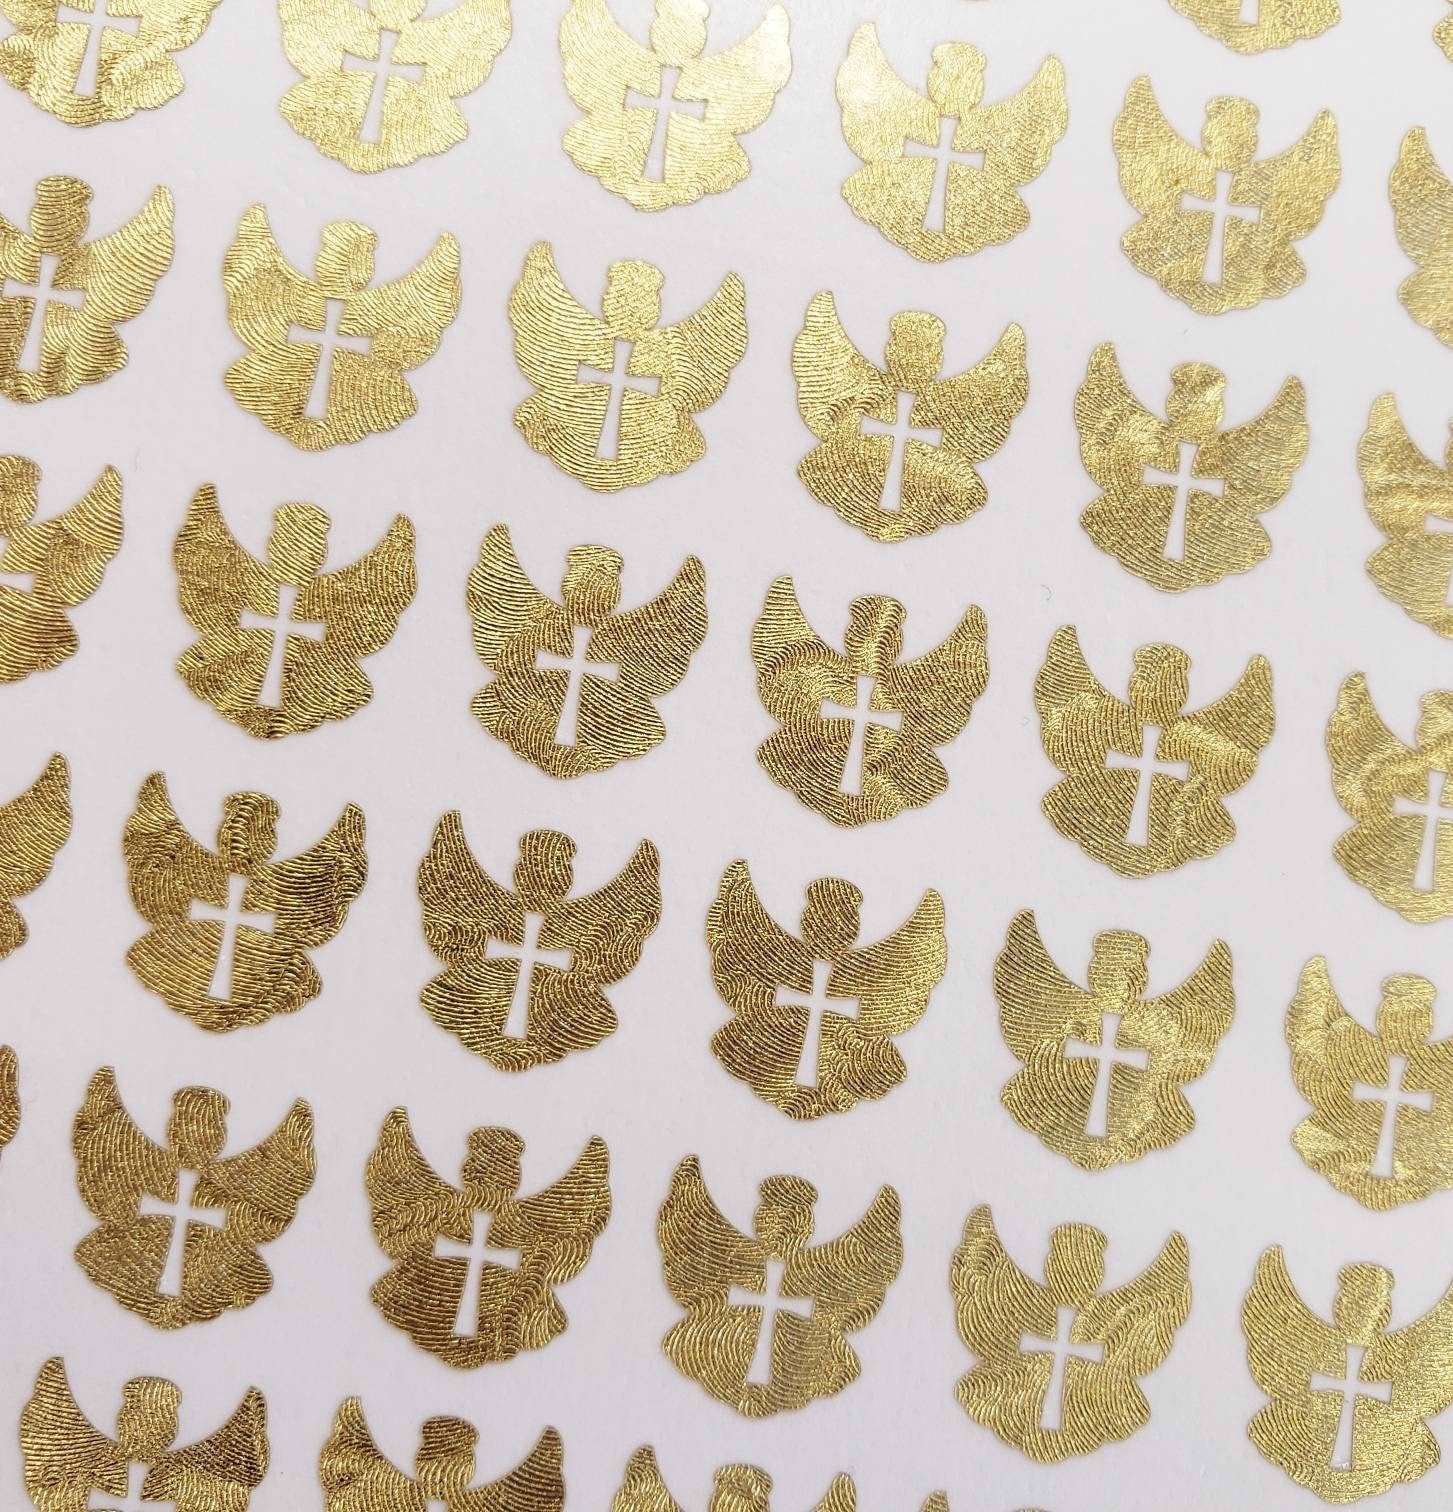 Angel Stickers, gold metallic vinyl decals, small angel labels for envelopes, baby baptism christening, funeral memorial, Christian stickers